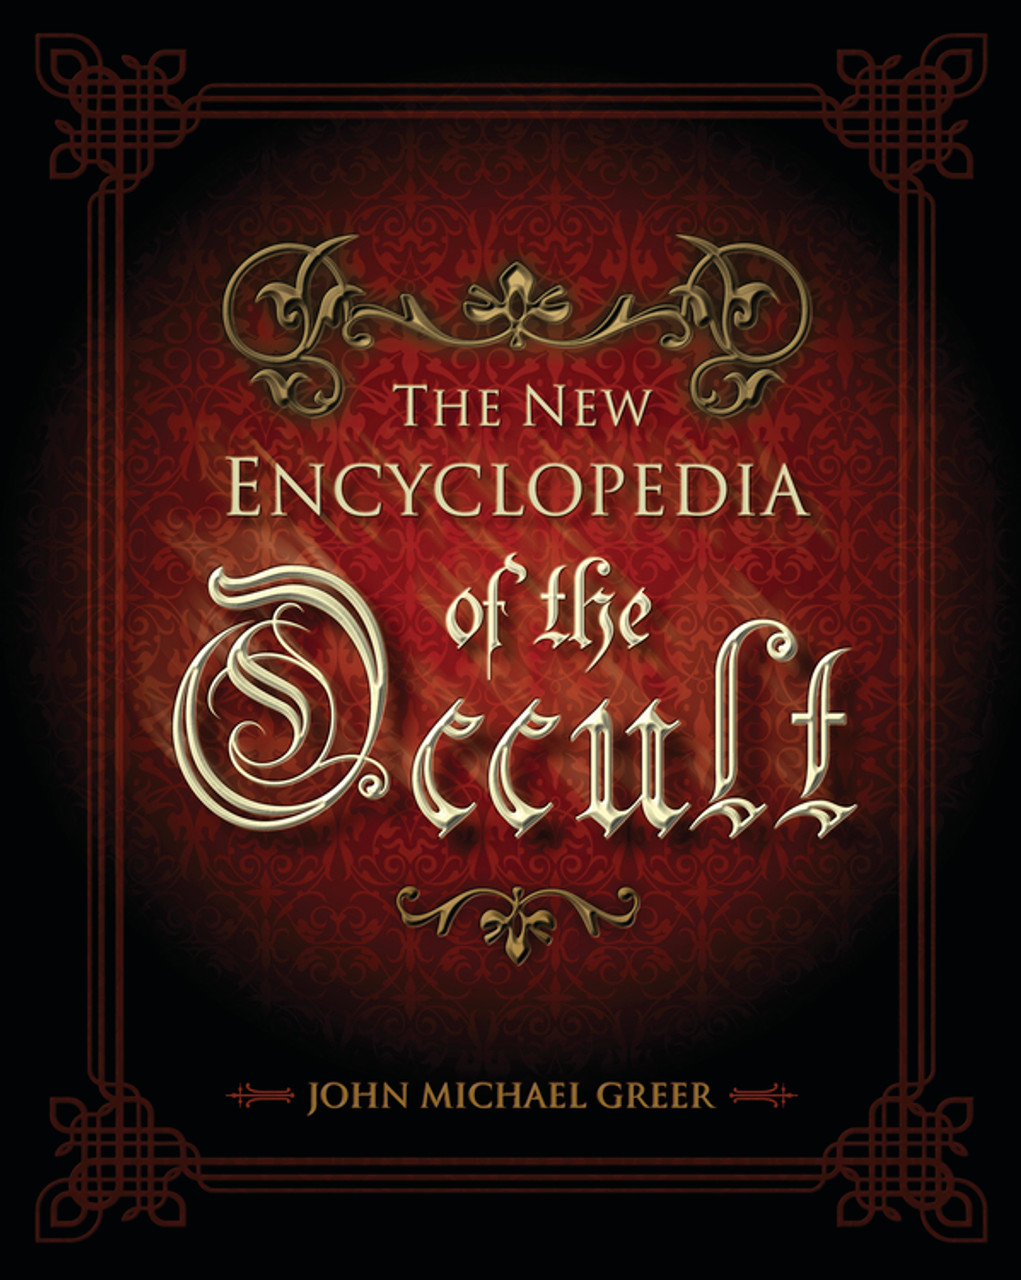 New Encyclopedia of the Occult